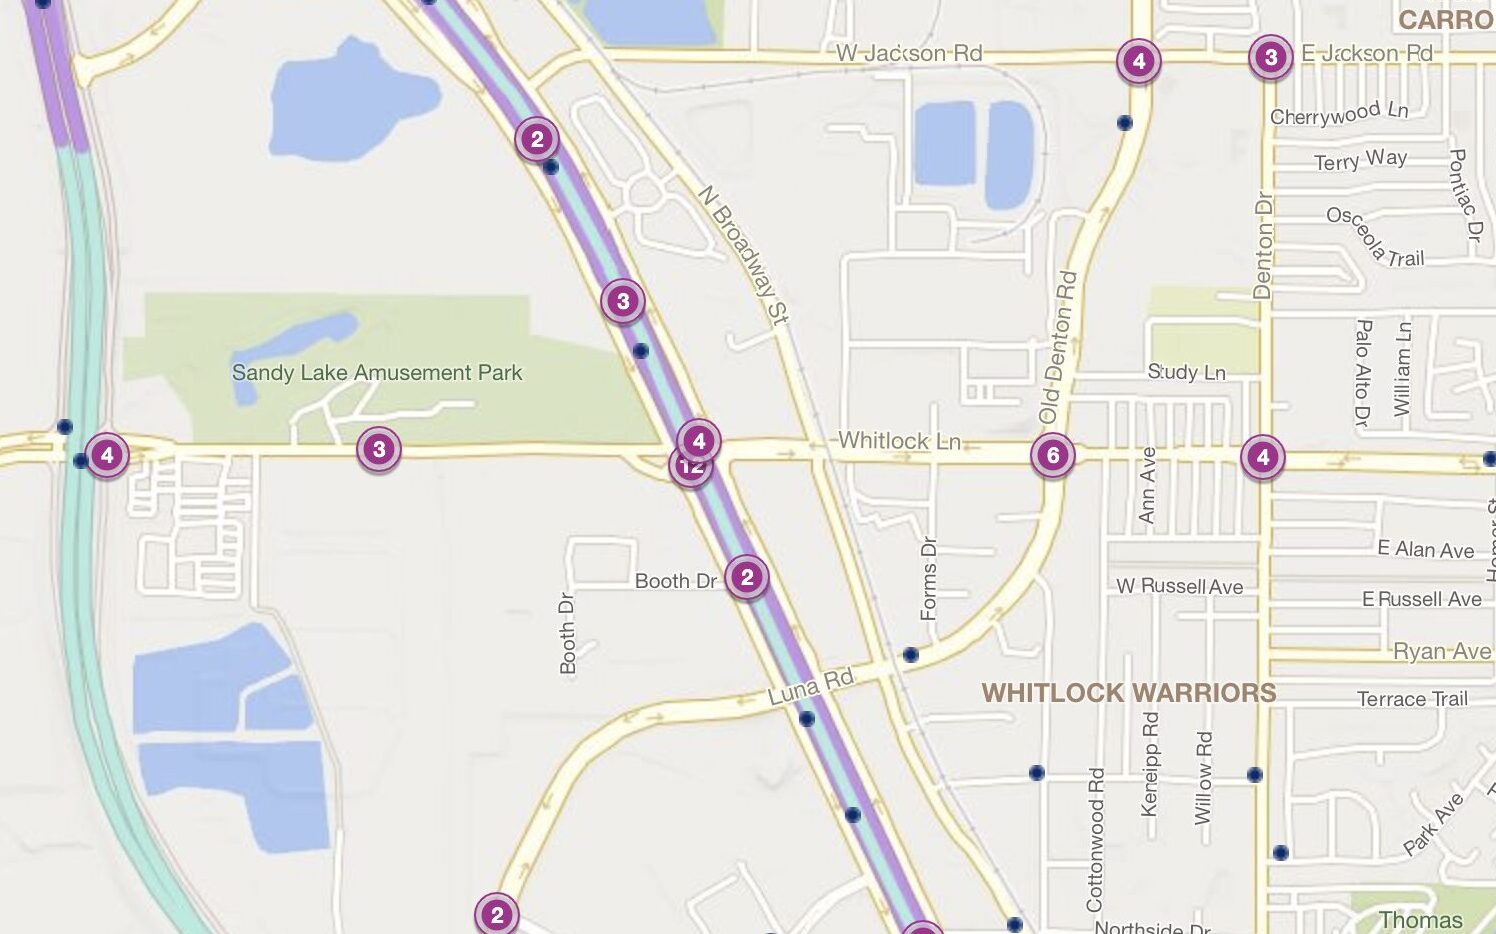 Cluster Map of 2023 Car Accidents at I-35E & Whitlock Ln. (TXDOT)